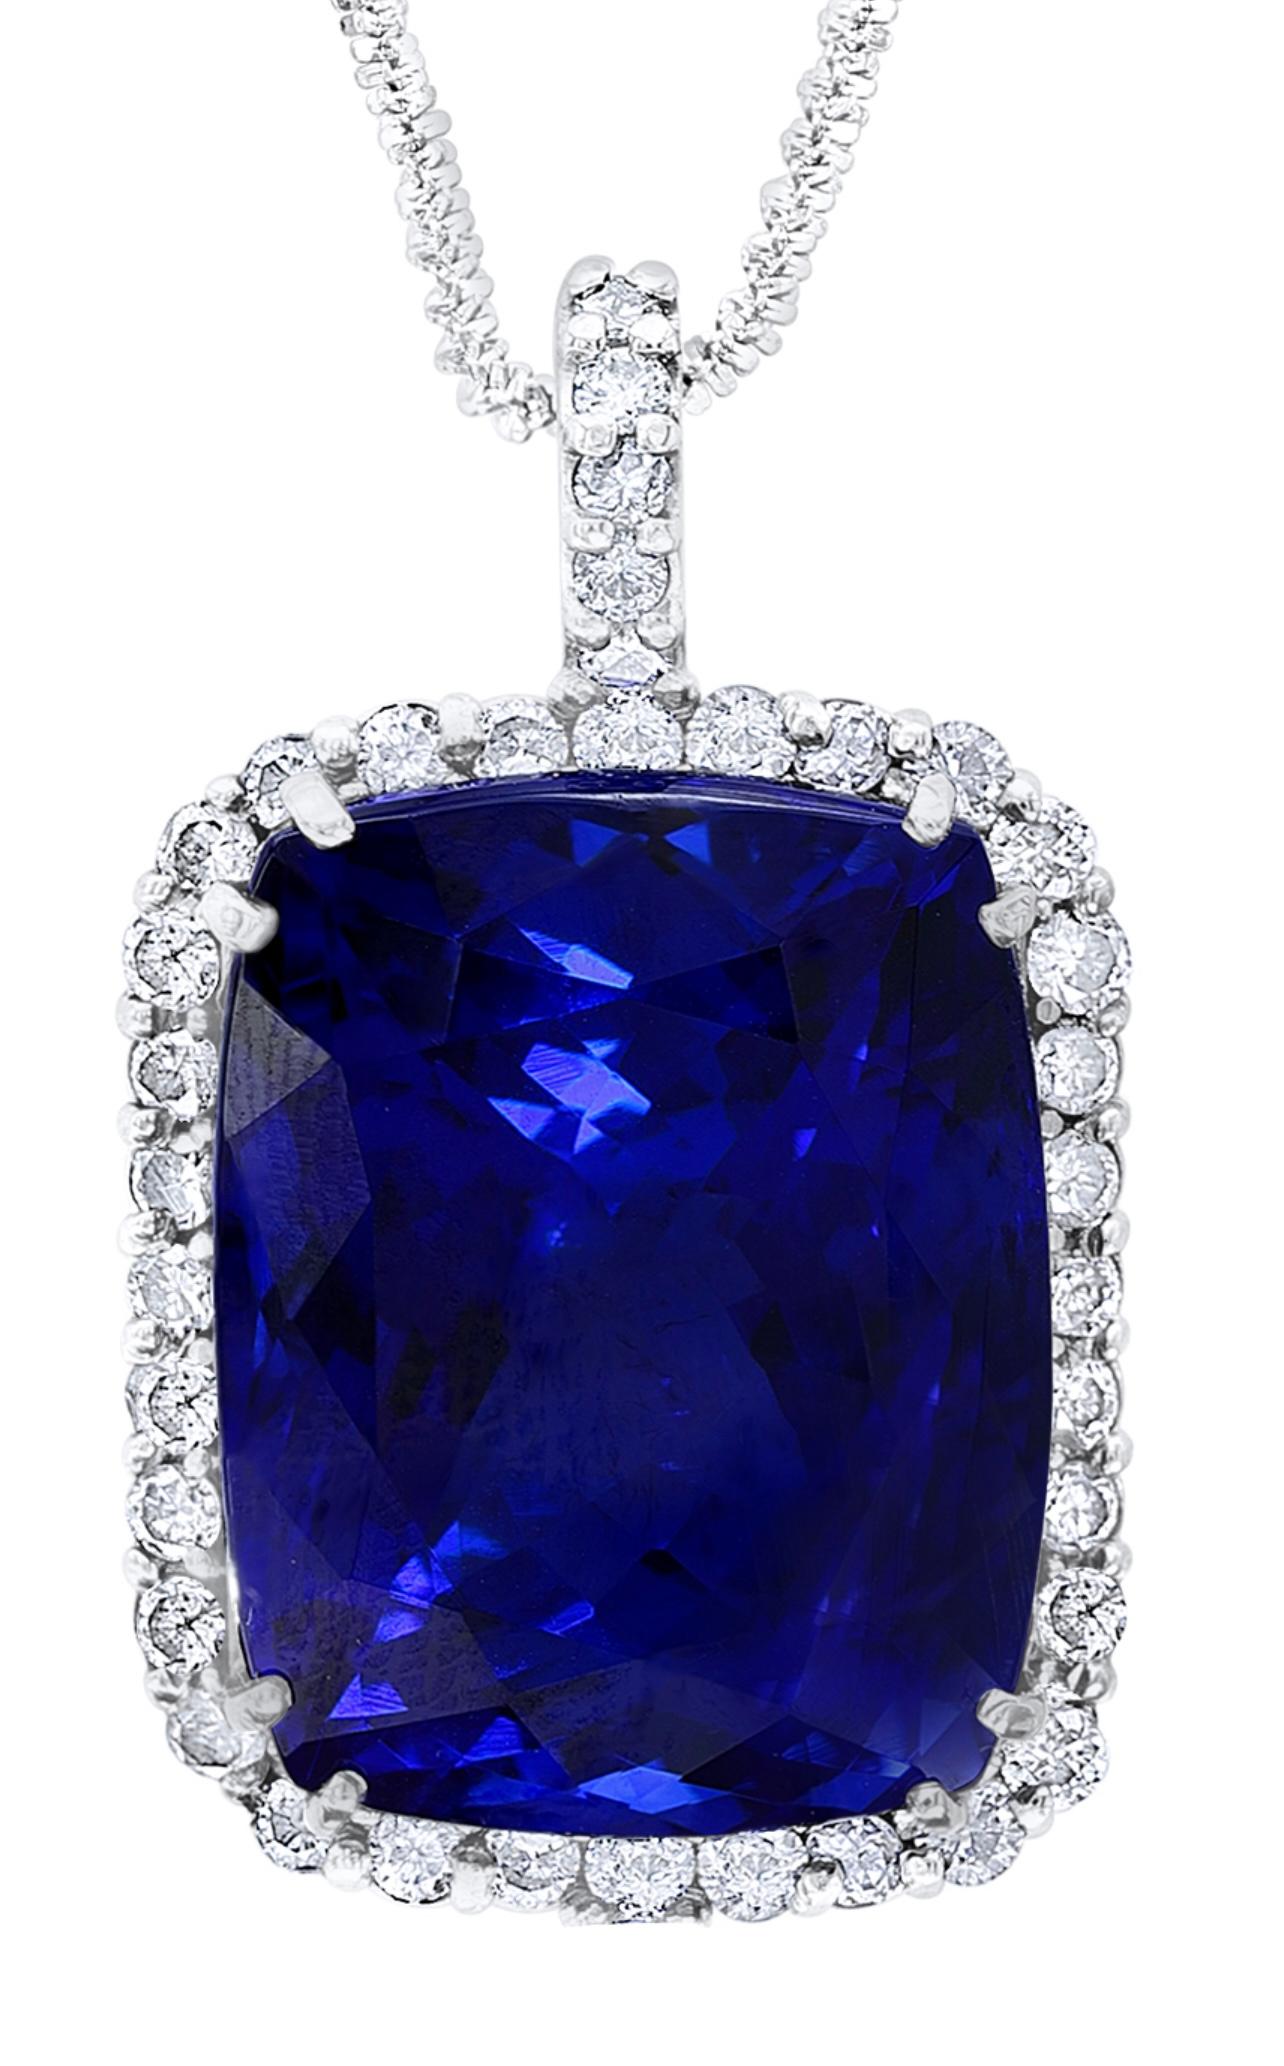 This extraordinary, 37.5 carat tanzanite is truly an extraordinary gemstone. There are  total  of 1.5 carats of shimmering white diamonds, this brilliant cushion-cut gem exhibits the rich violetish-blue color for which these stones are known and so